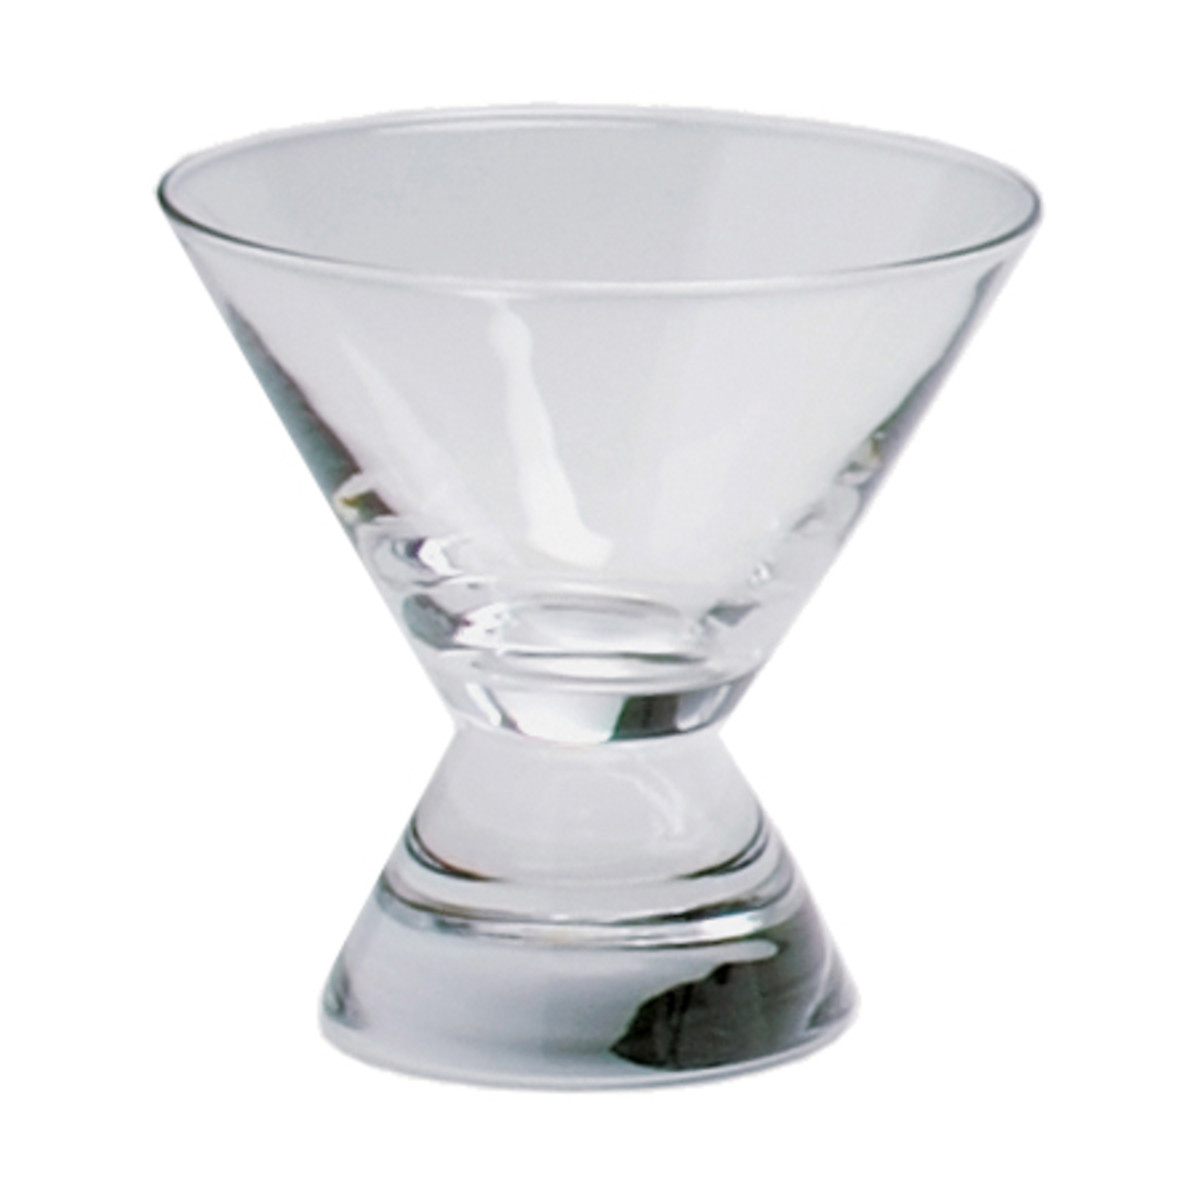 After Hours Tini Martini 2.5oz